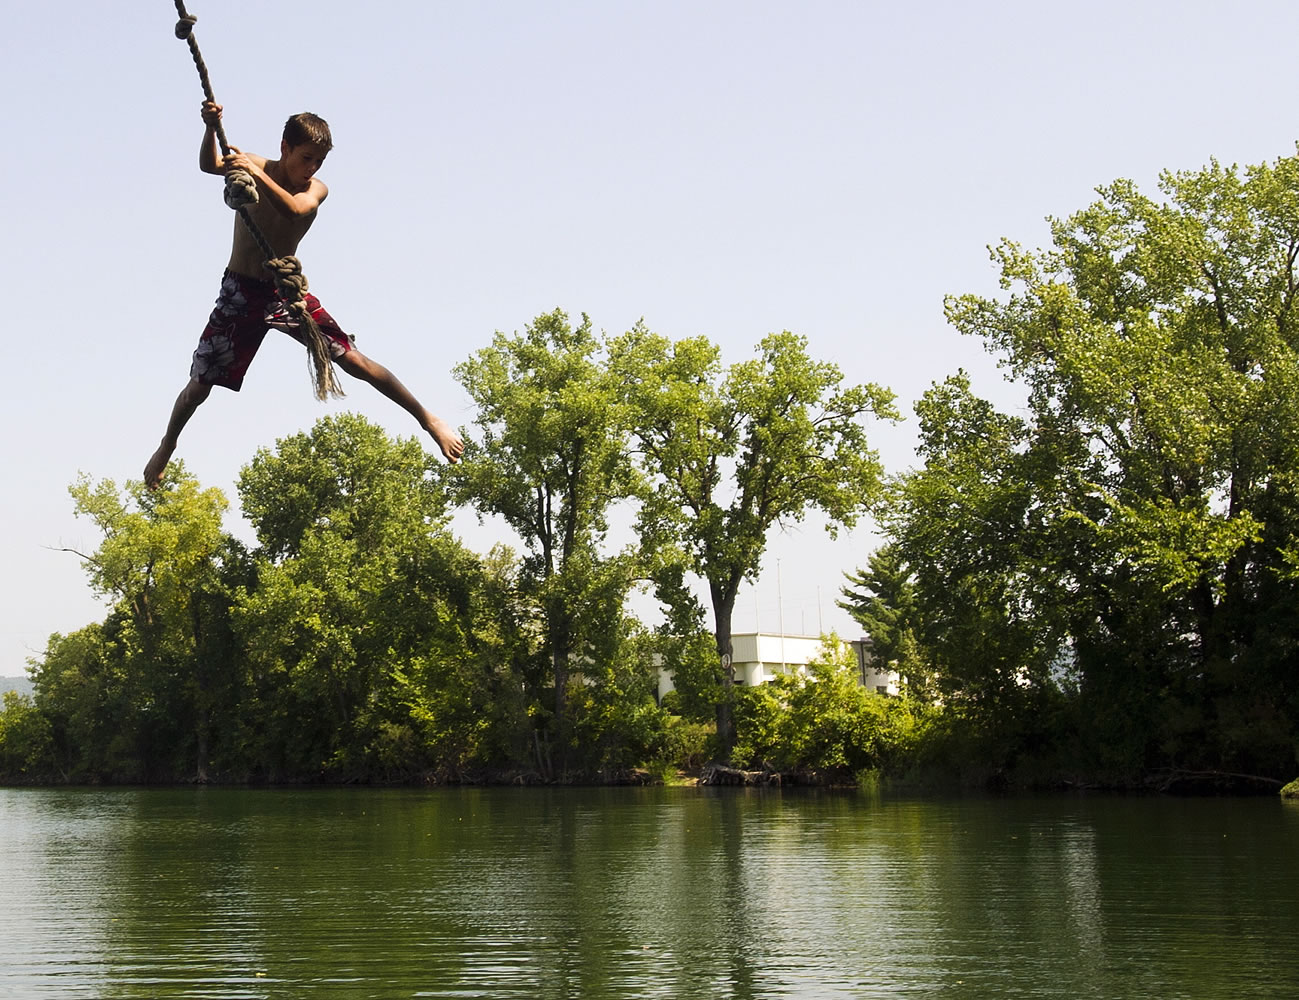 Reece Riebel, 13, of Lewiston, Minn., swings on a rope swing over Airport Lake while swimming Monday in Winona, Minn.